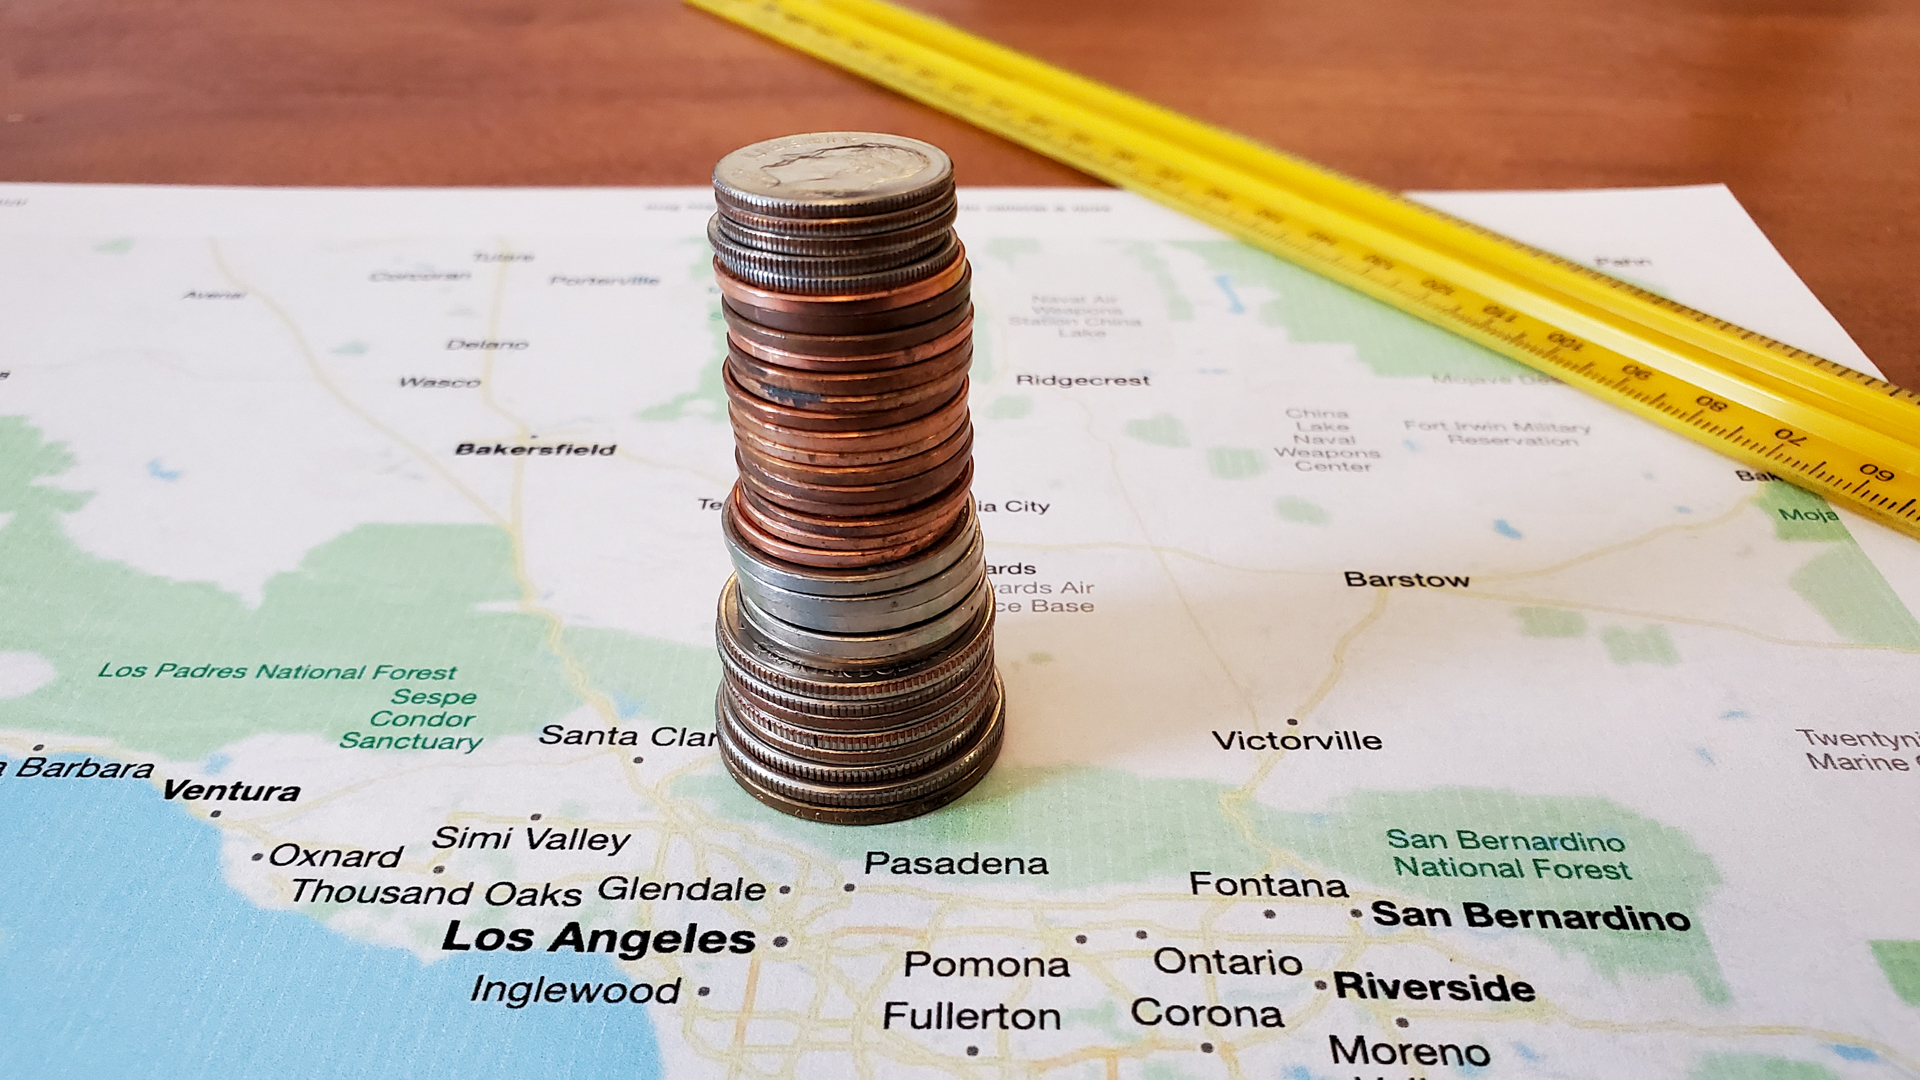 Coins stacked on top of a printed map of the Los Angeles area.